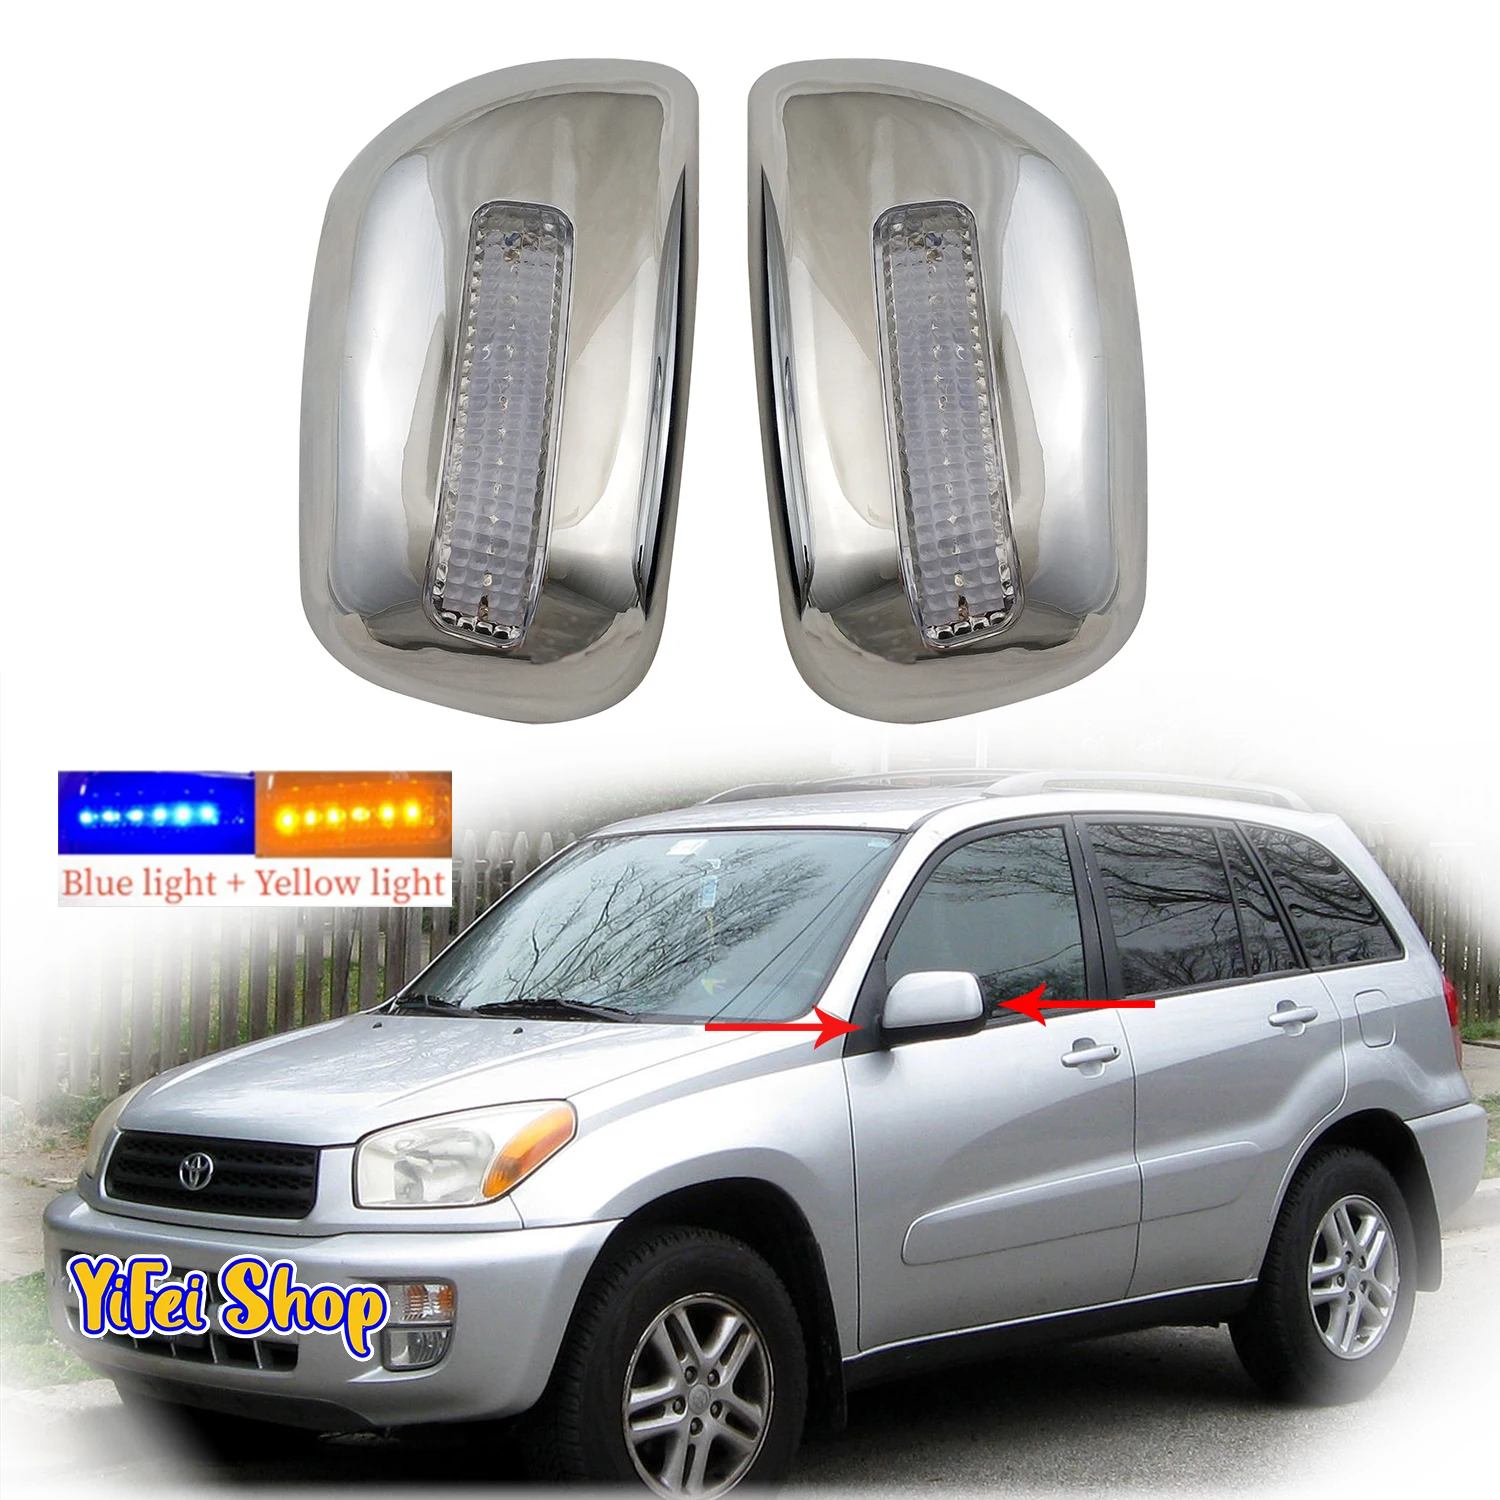 

Modern Design Car ABS Chrome Rearview Accessories Trim For Toyota RAV4 RAV 4 2001 2002 2003 2004 2005 Door Mirror Cover With LED